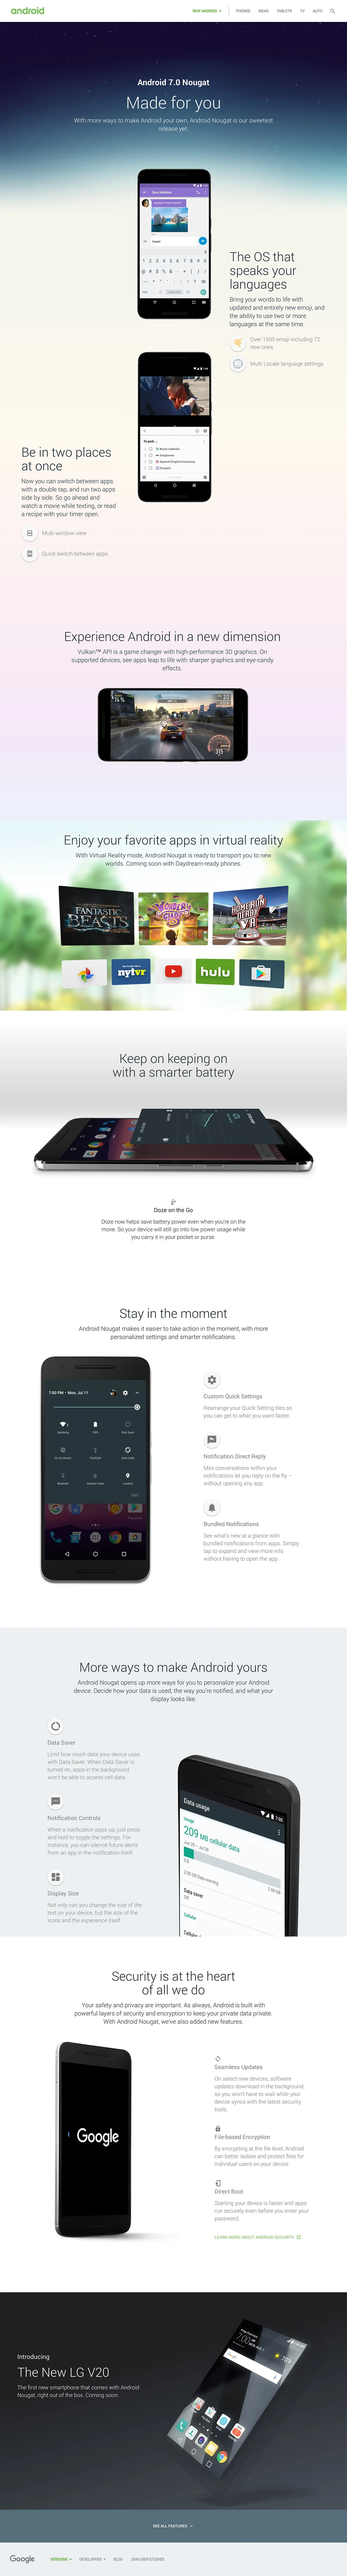 Android 7.0 Nougat Landing Page Example: With more ways to make Android your own, Android Nougat is our sweetest release yet.